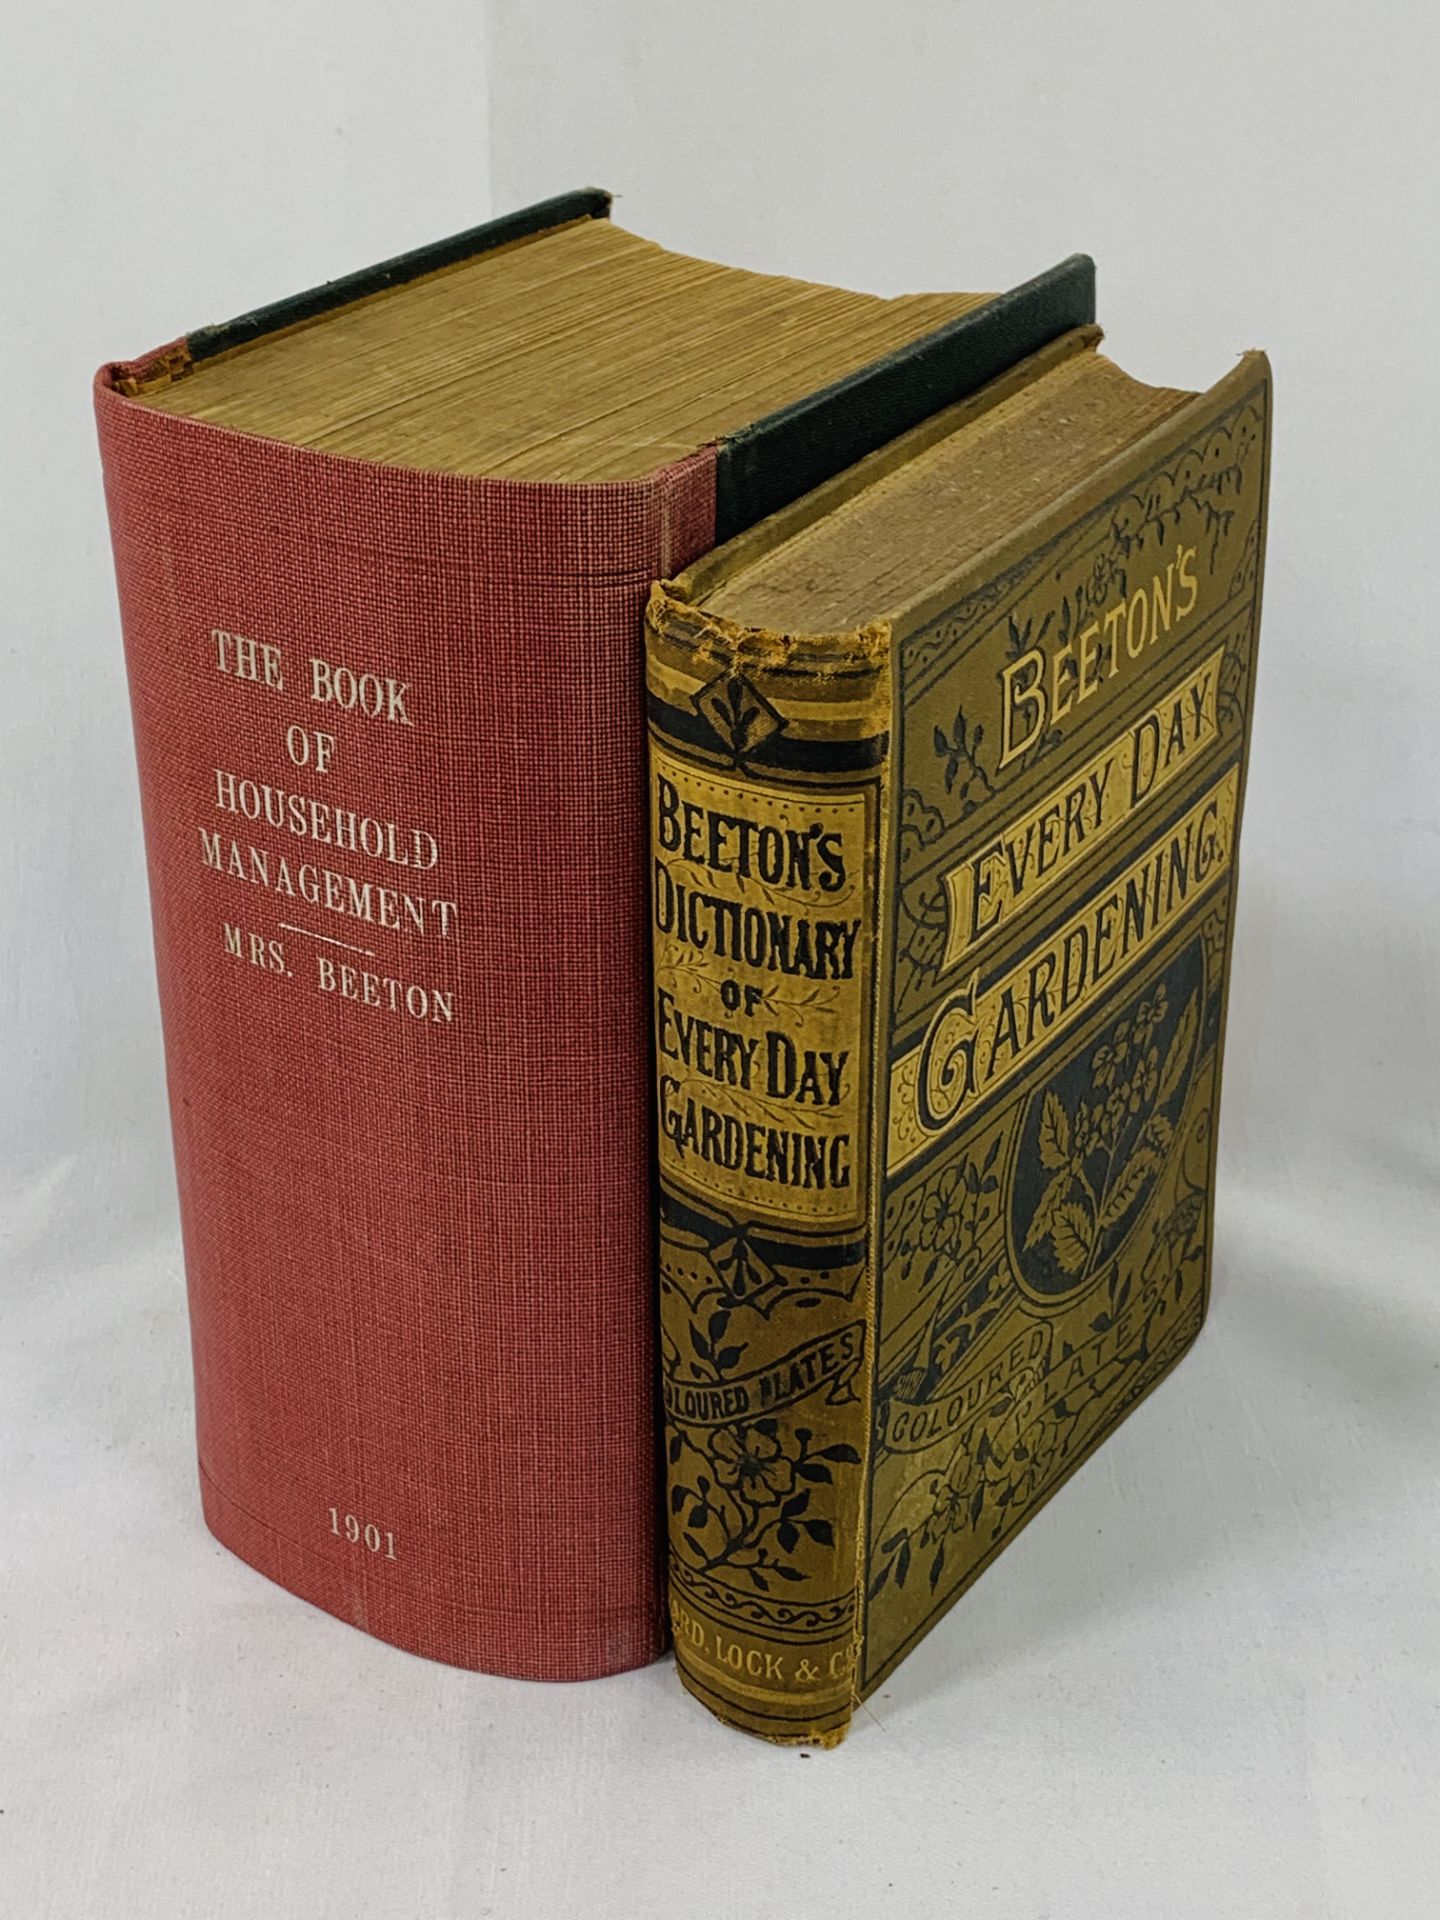 The Book of Household Management by Mrs Beeton, 1901, and Beeton's Dictionary of Every Day Gardening